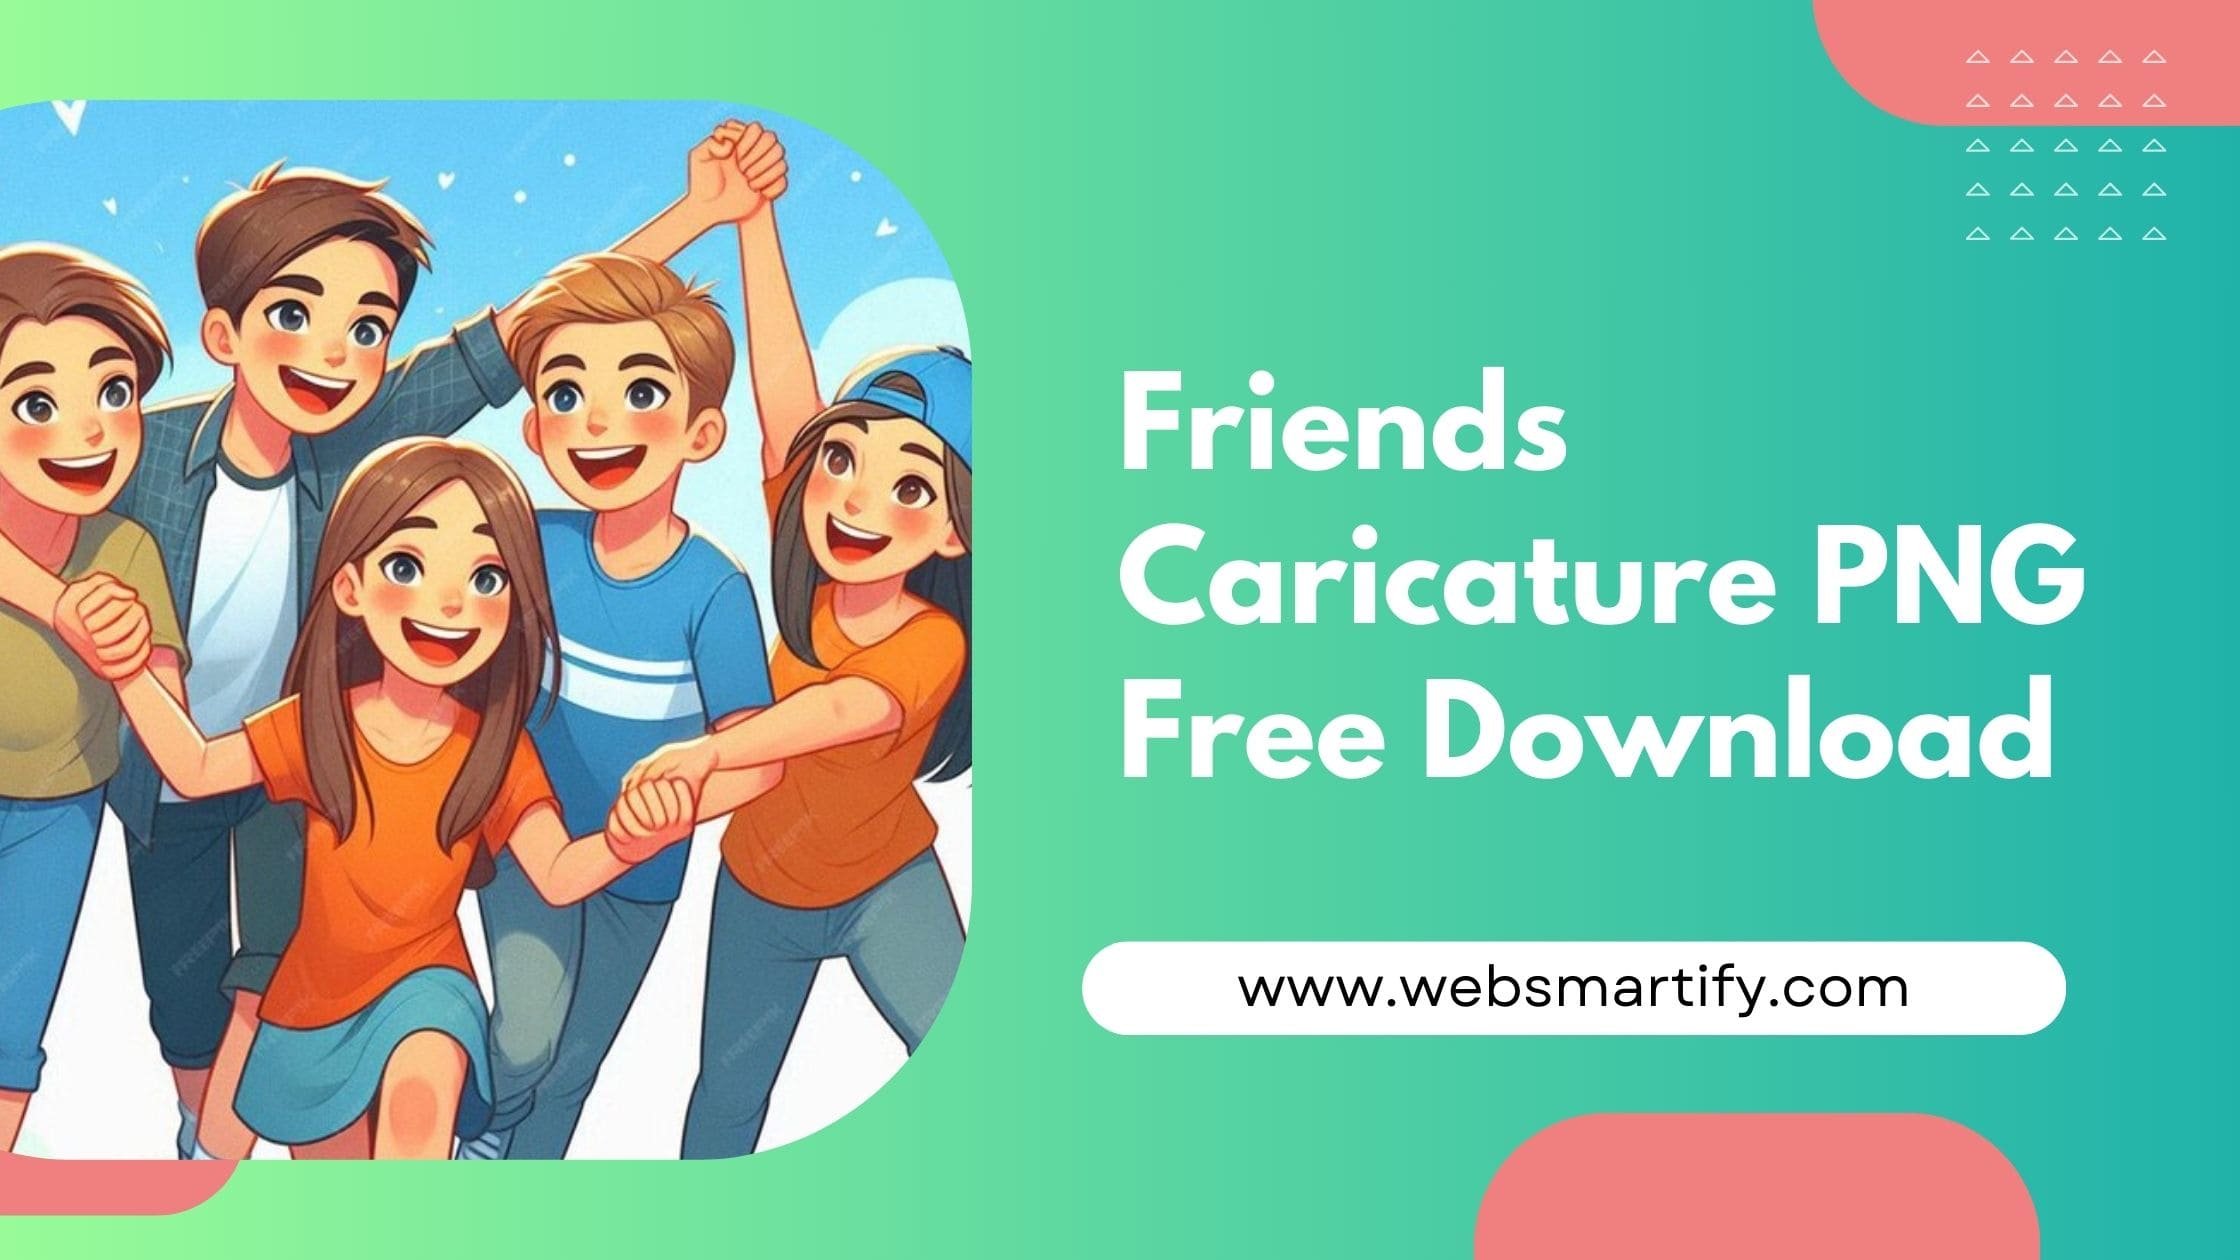 High-quality Friends Caricature PNG free download - Websmartify